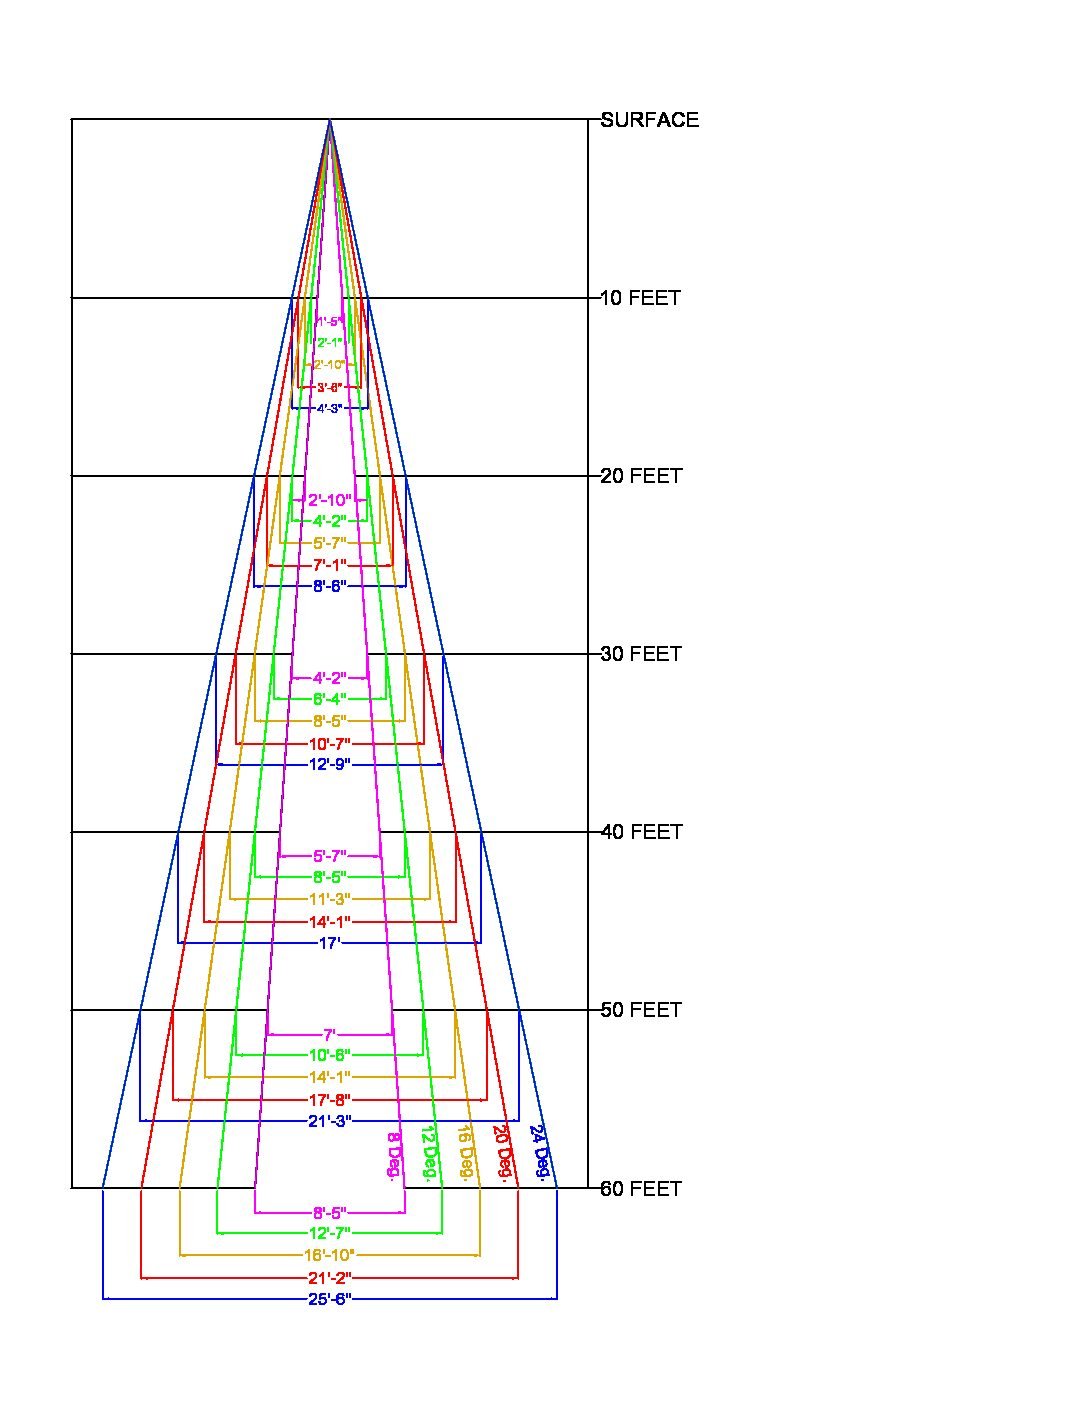 So I Made A Cone Angle Diagram - Ice Fishing Forum - Ice Fishing